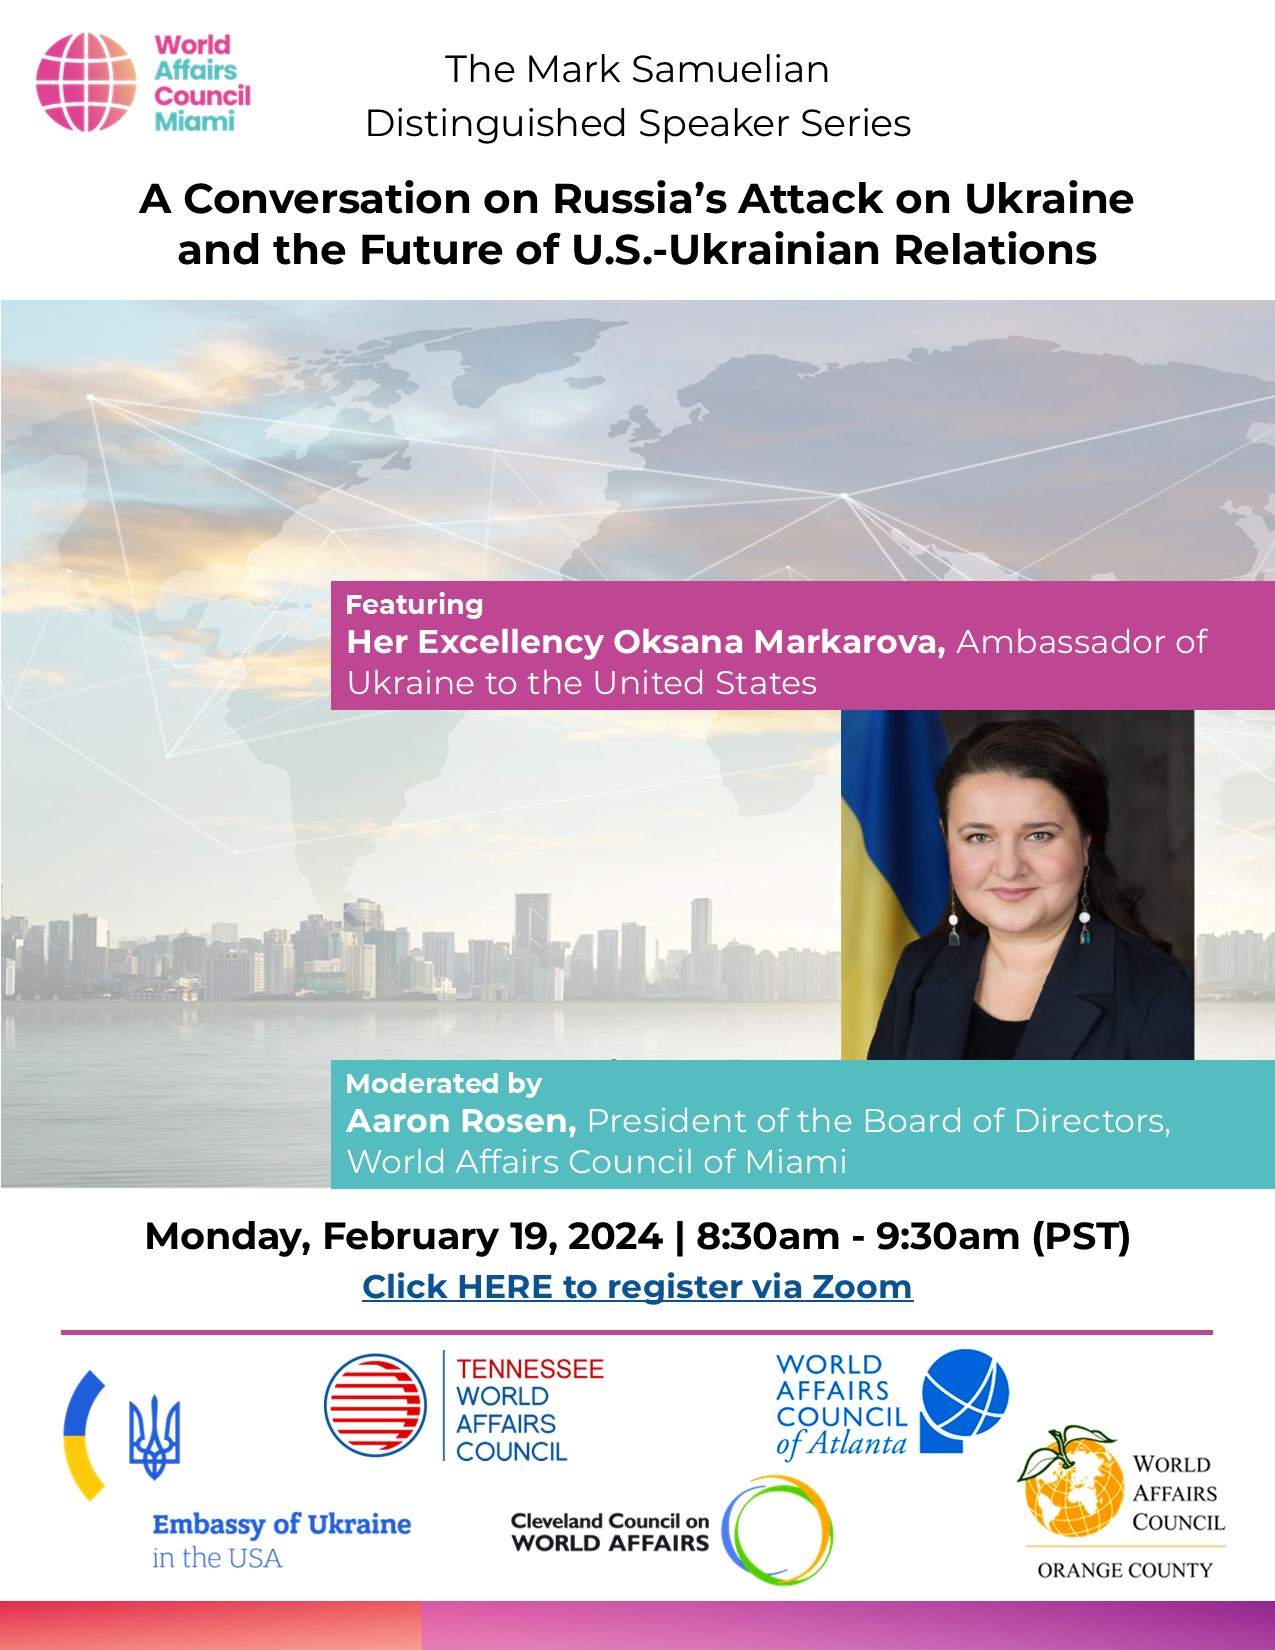 Webinar: A Conversation on Russia's Attack on Ukraine and the Future of U.S.-Ukrainian Relations